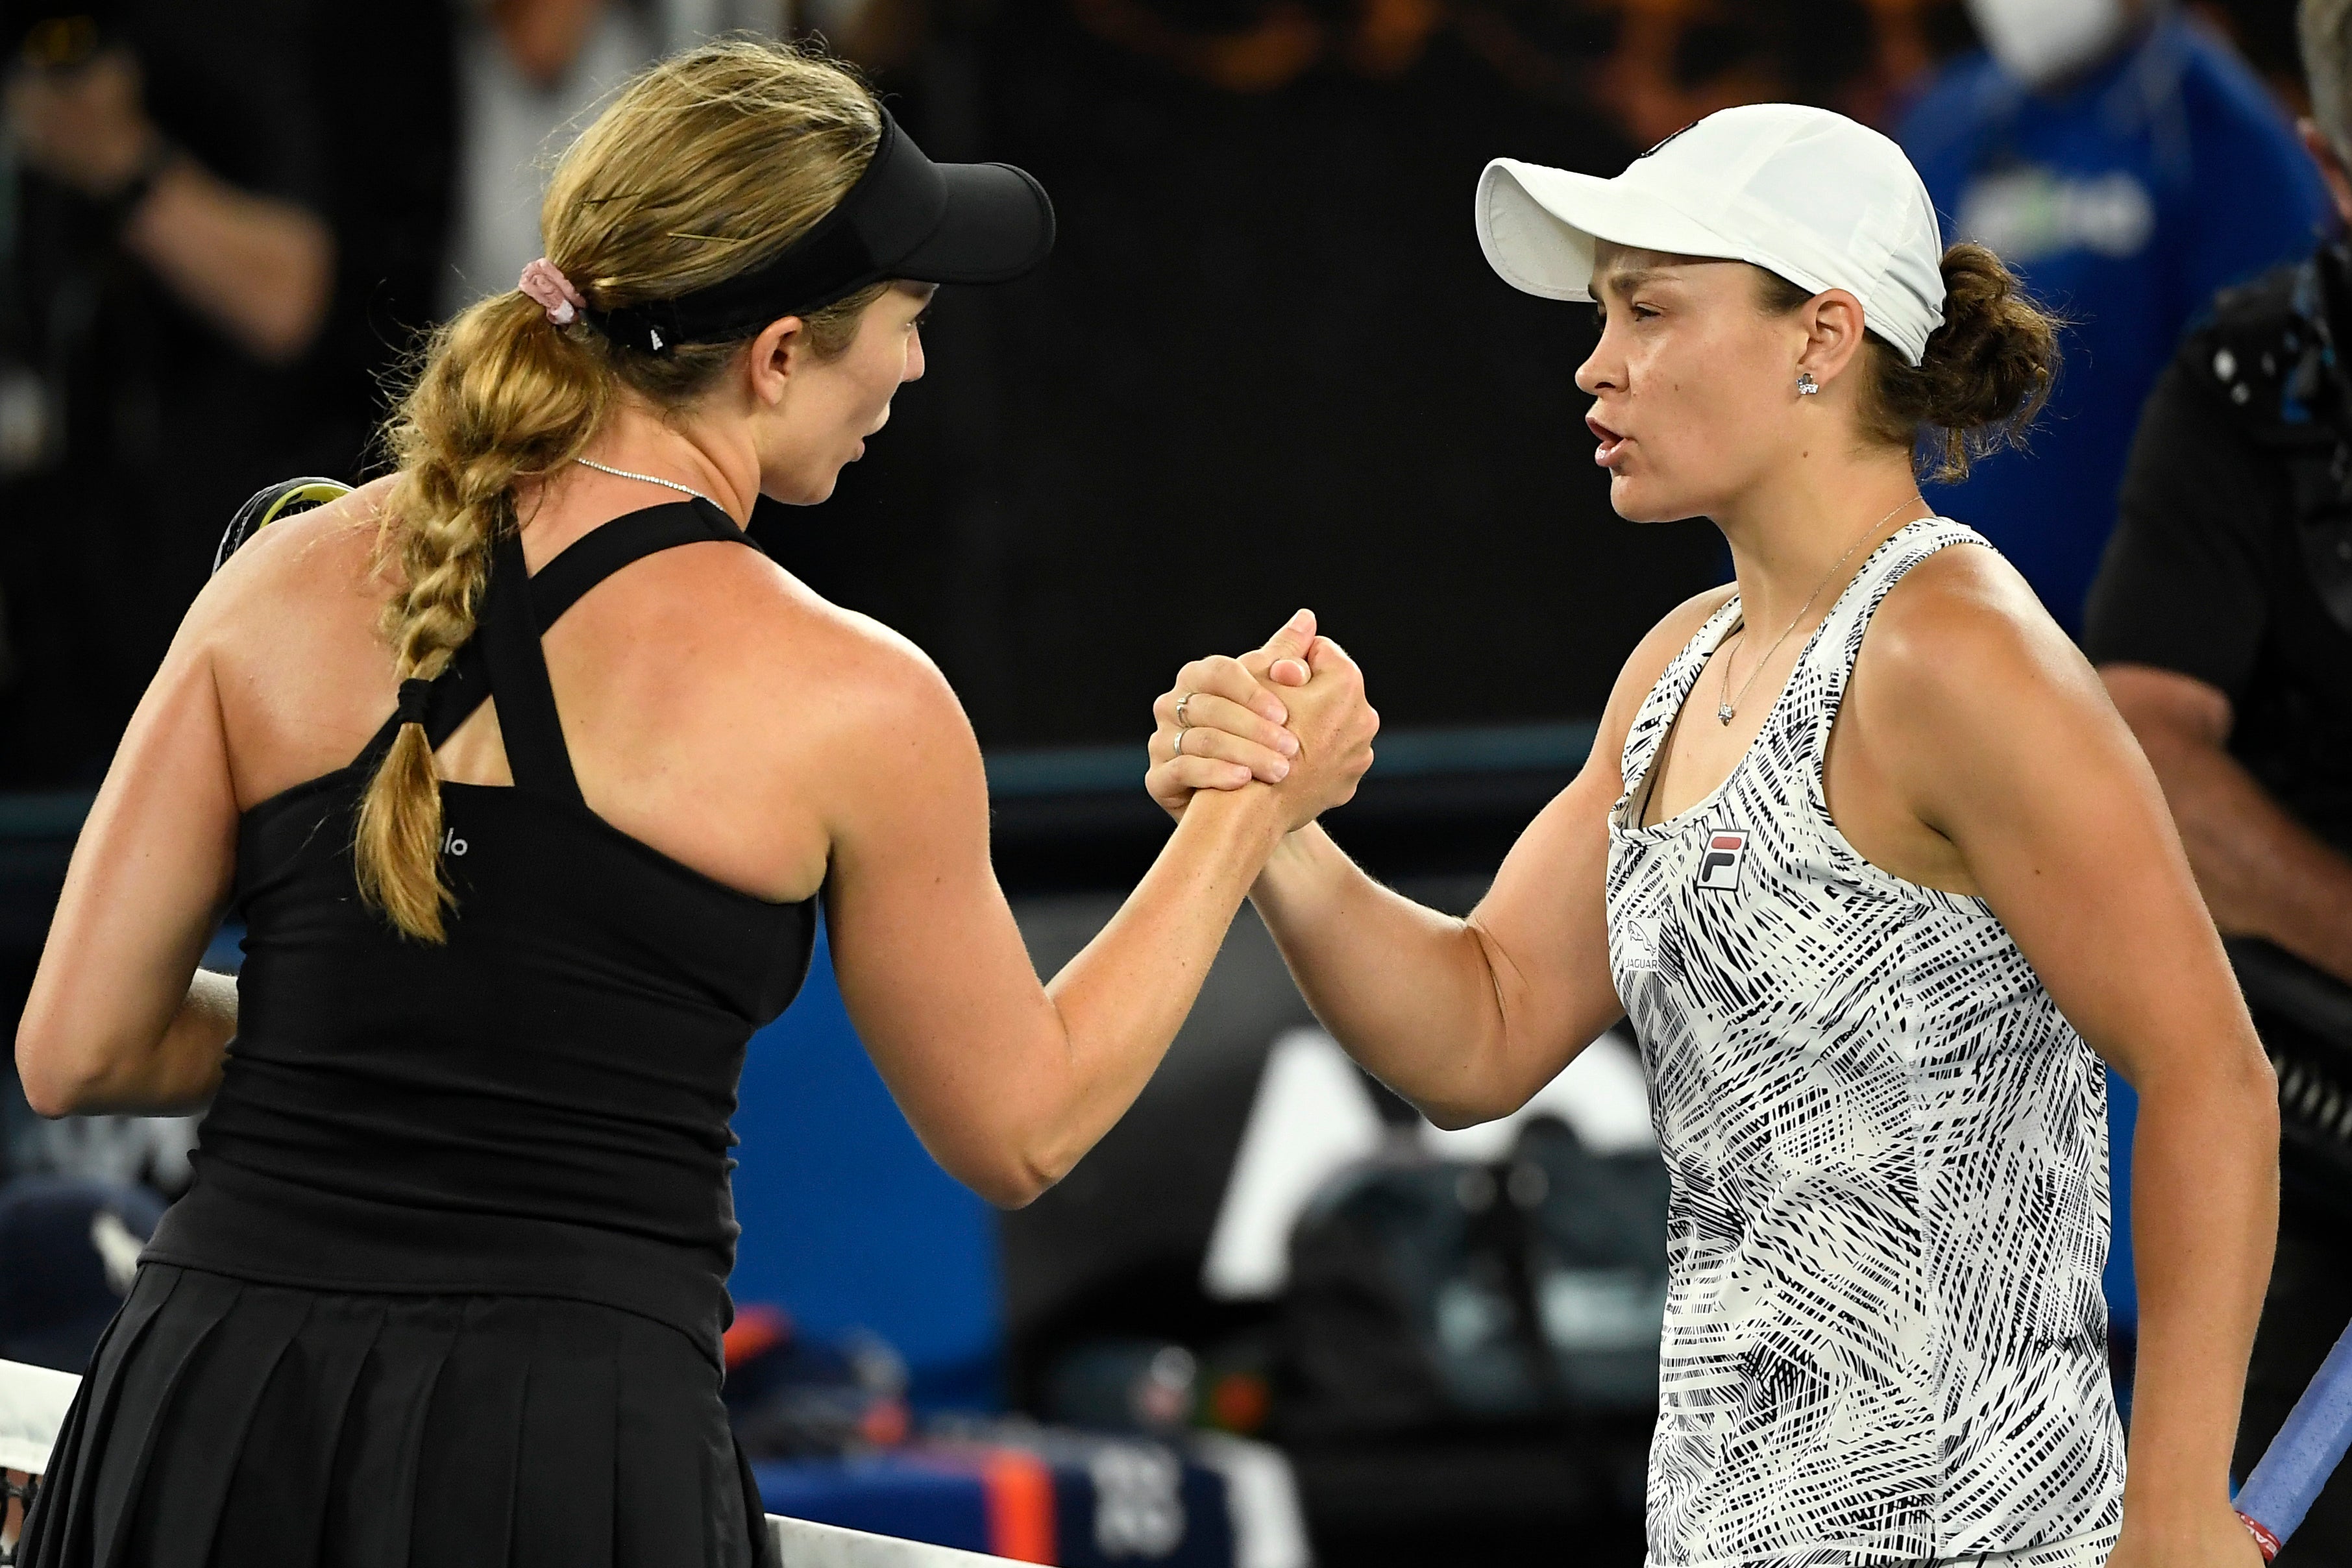 Danielle Collins pushed Ashleigh Barty hard in the final but the Australian failed to drop a single set at the tournament (Andy Brownbill/AP/PA)